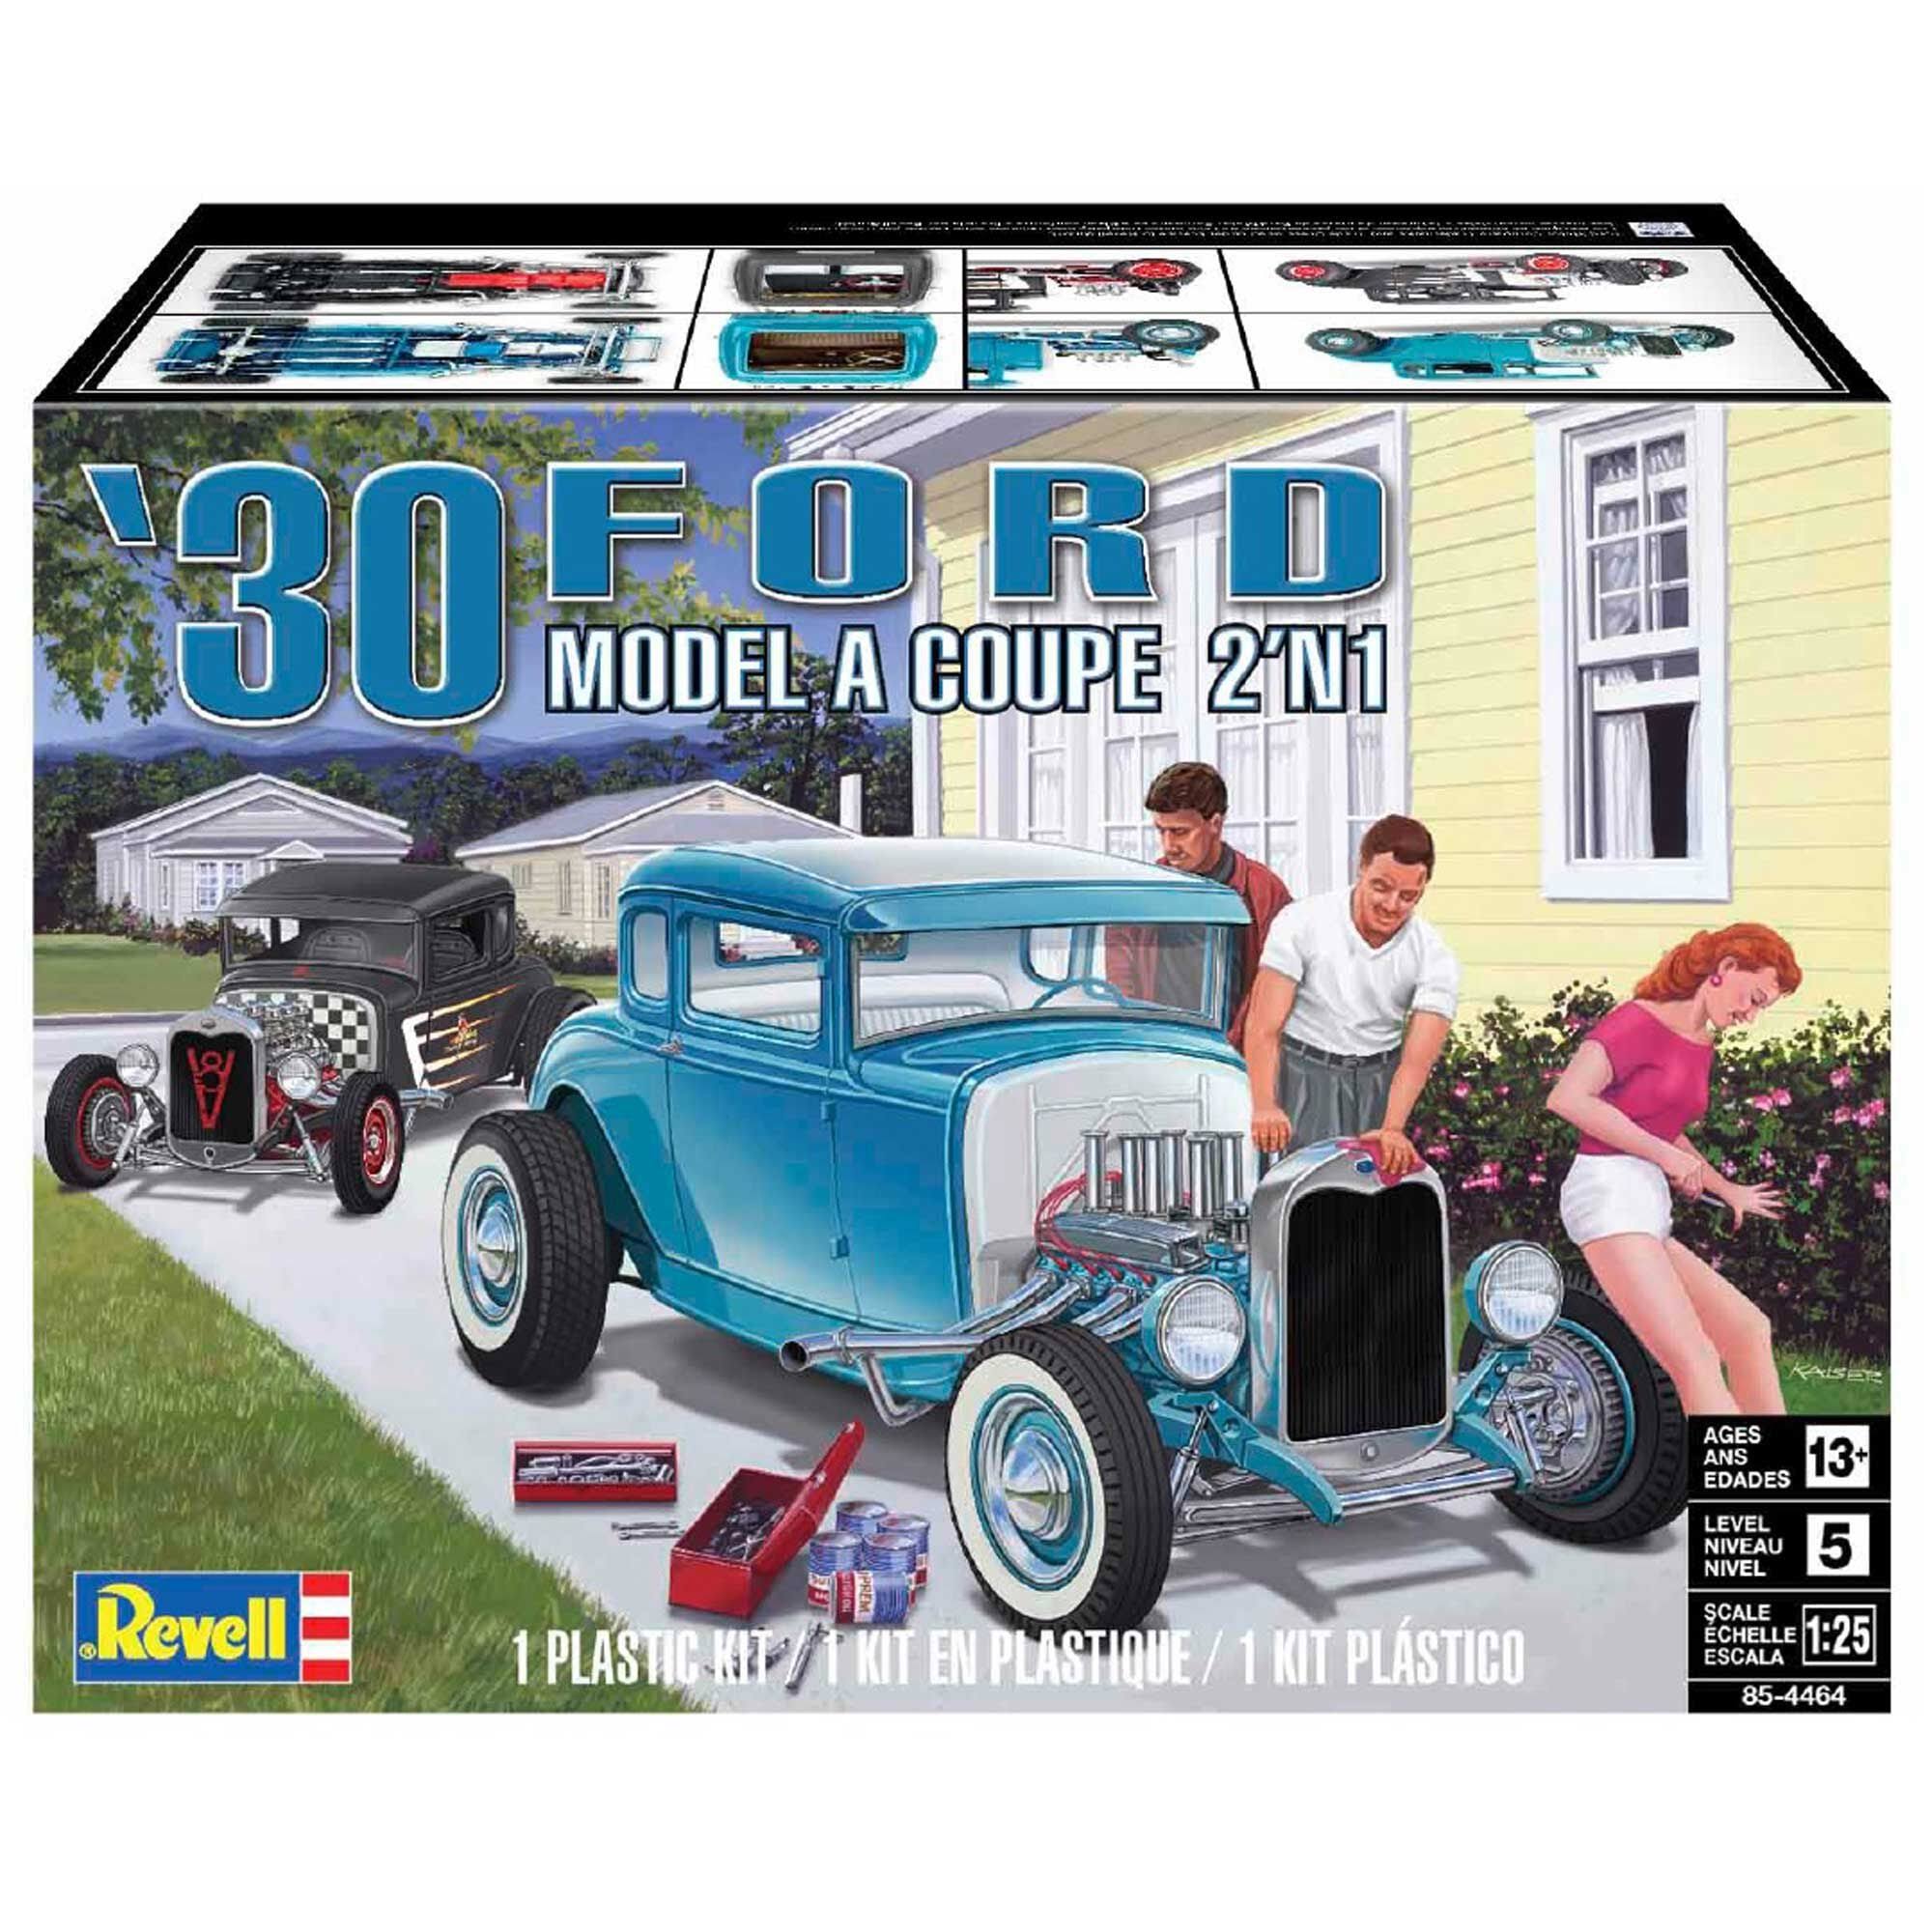 Revell 4464 - 1/25 1930 Ford Model A Coupe